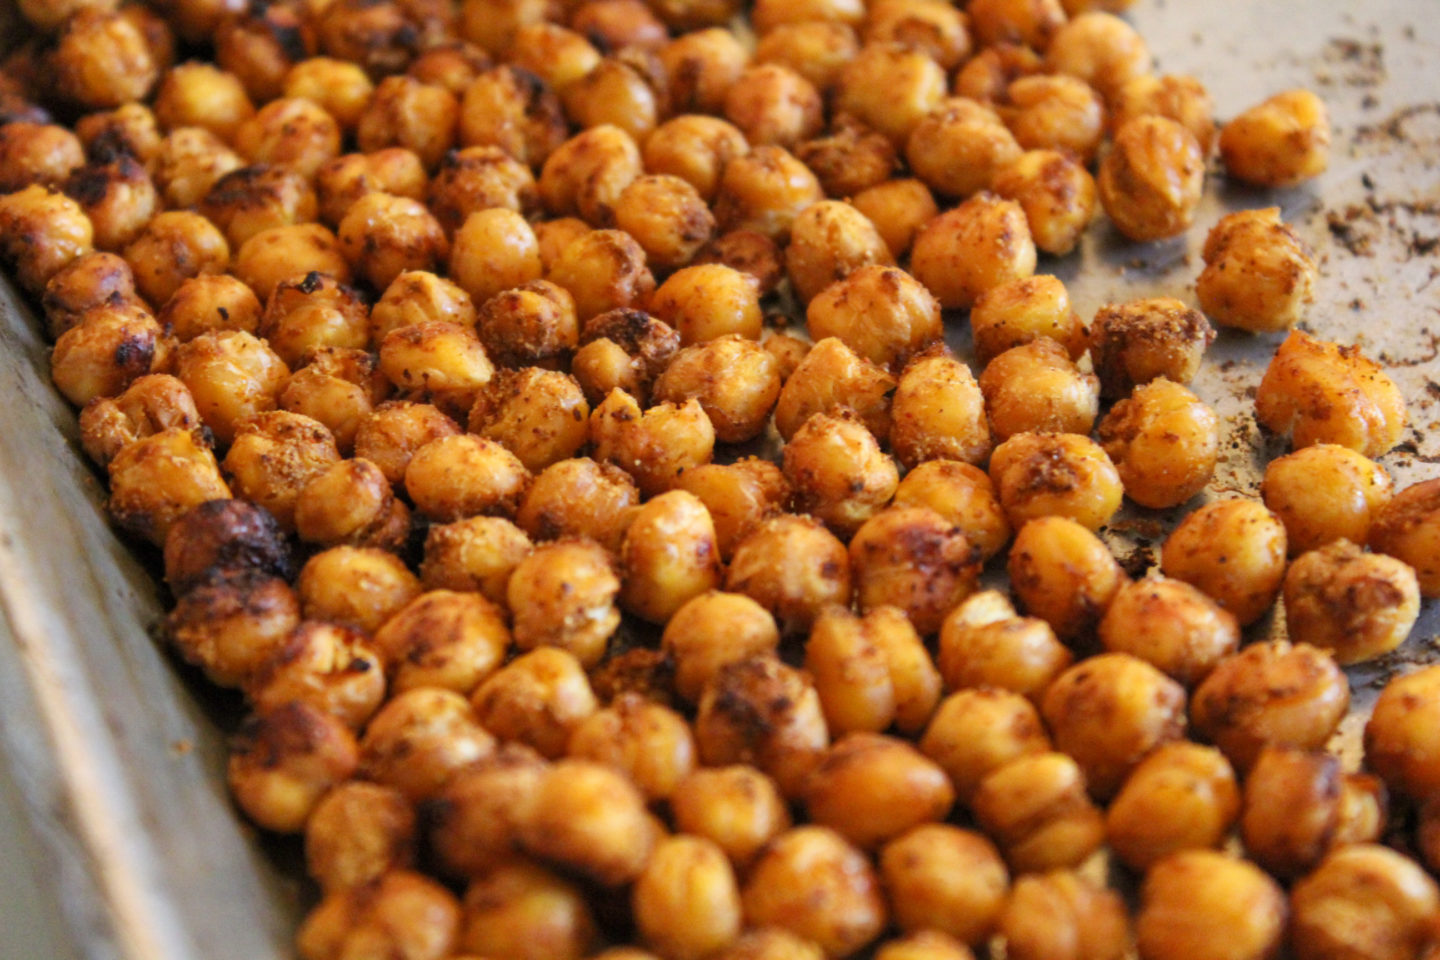 A picture of chili lime roasted chickpeas